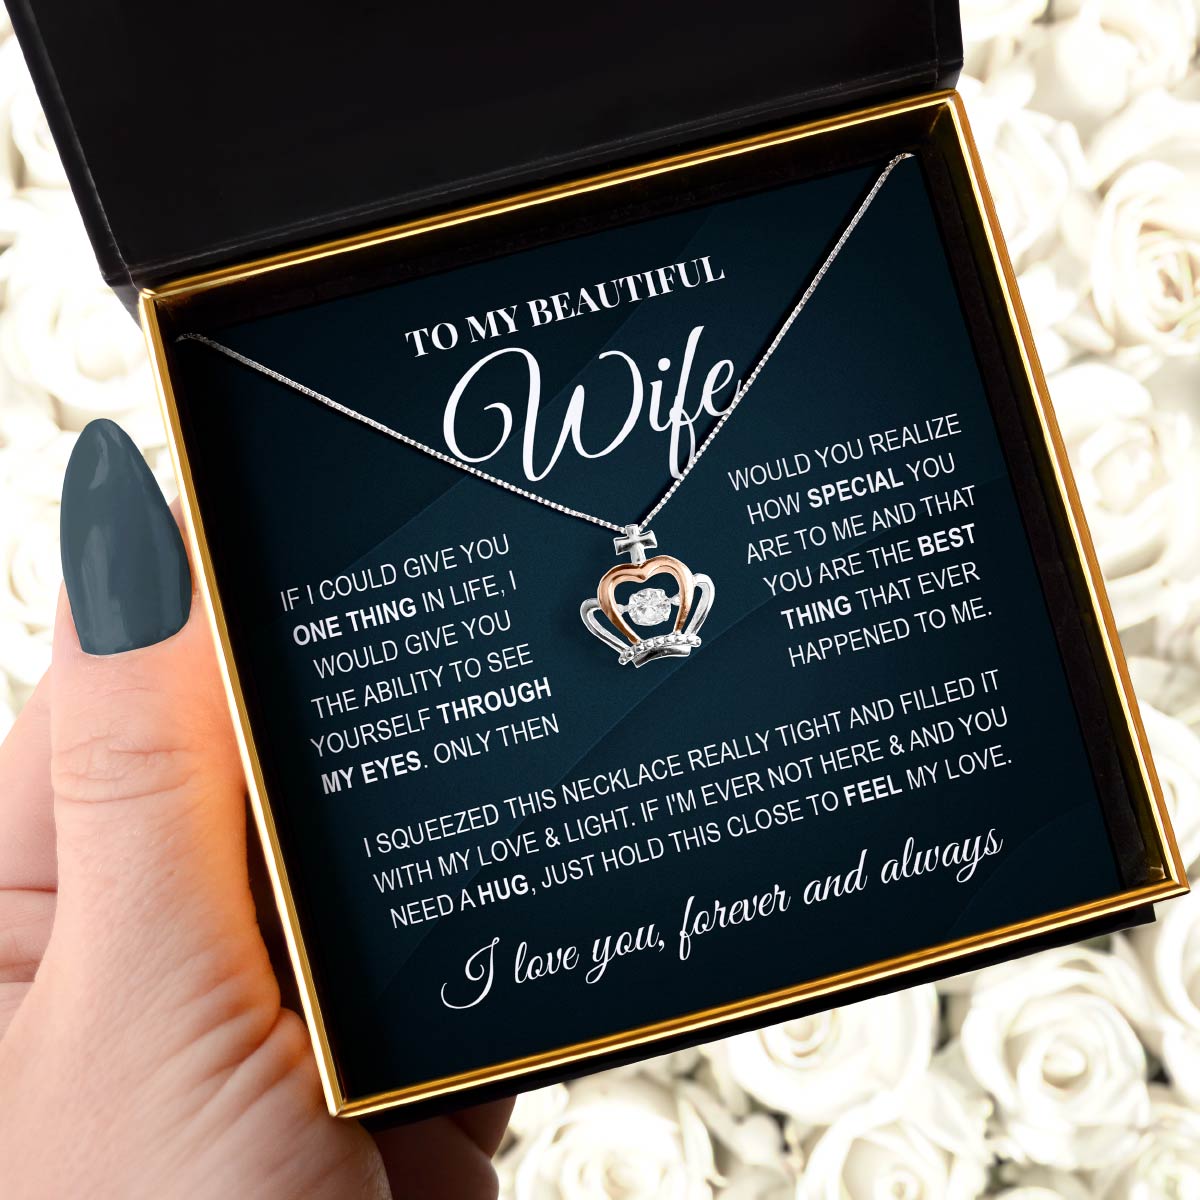 To My Beautiful Wife, If I Could Give You One Thing - Luxe Crown Necklace Gift Set